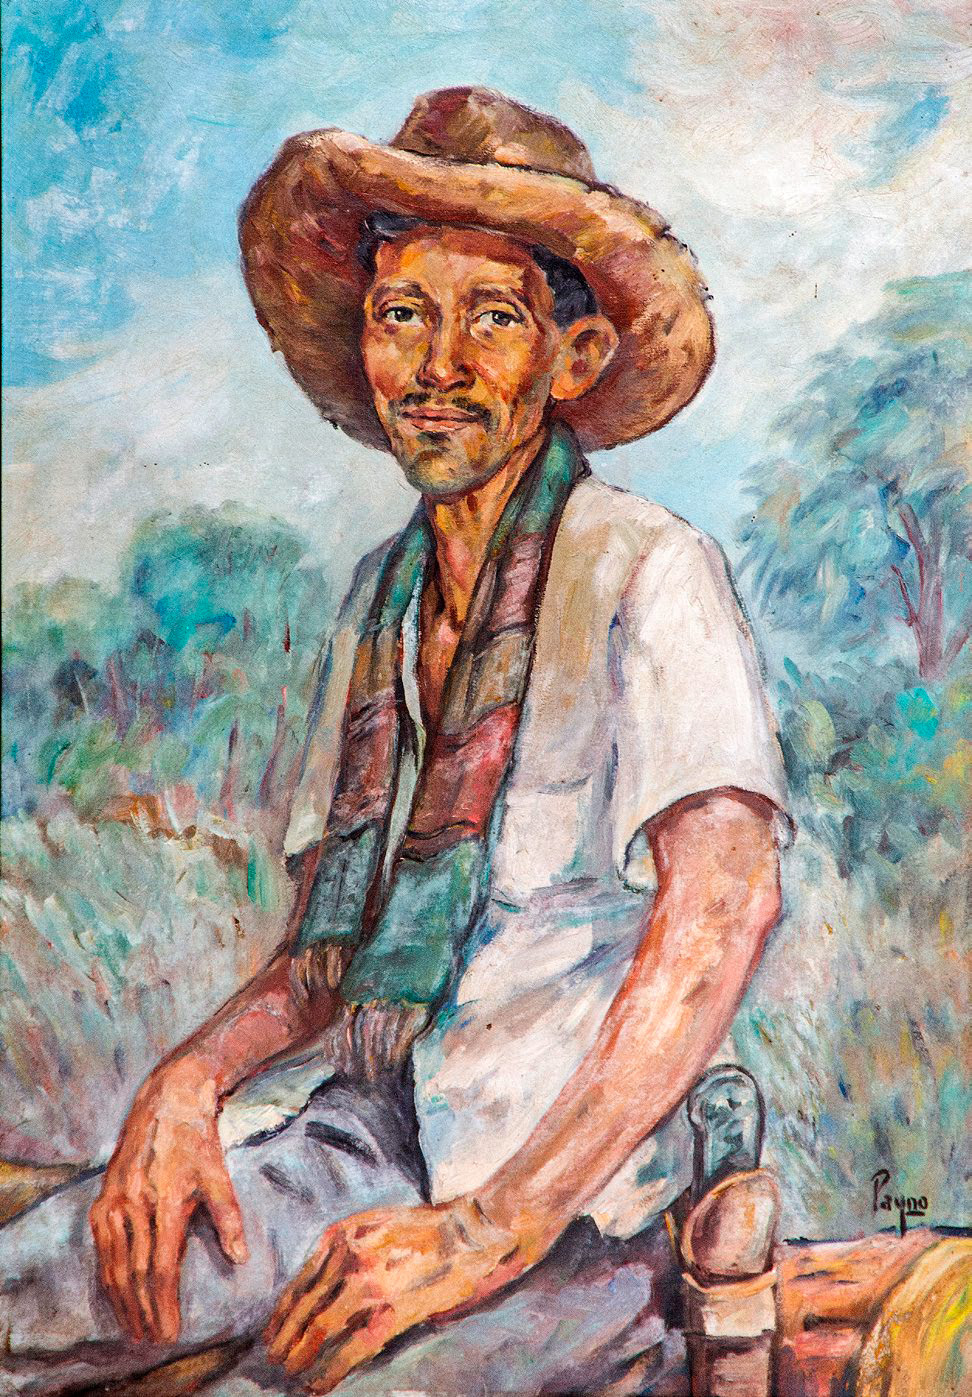 El Capataz, Painting by | Artmajeur